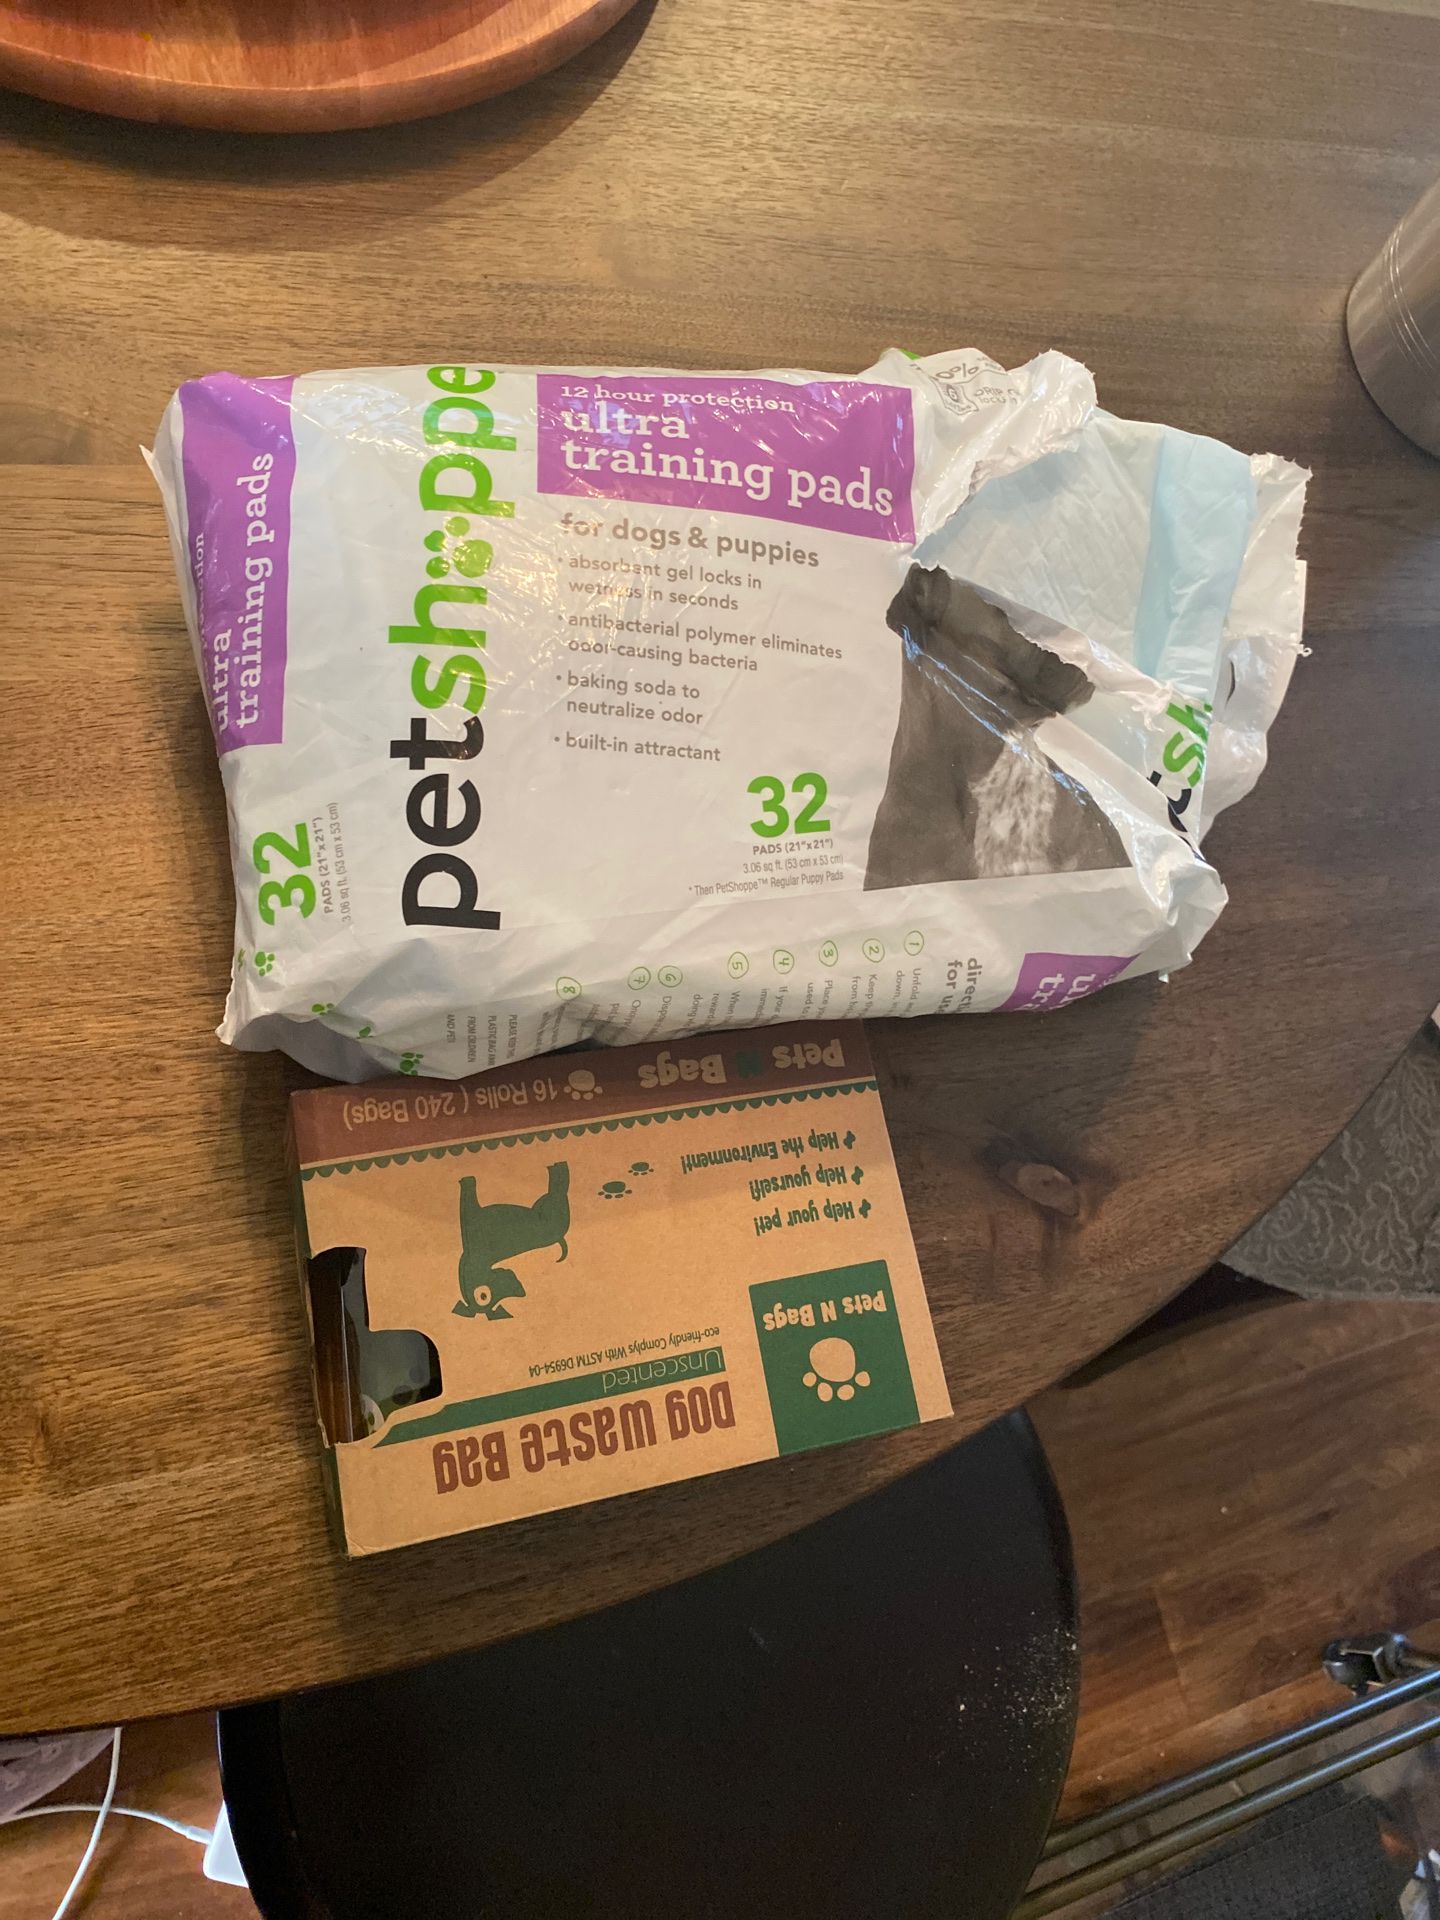 Free doggie pads and waste bags